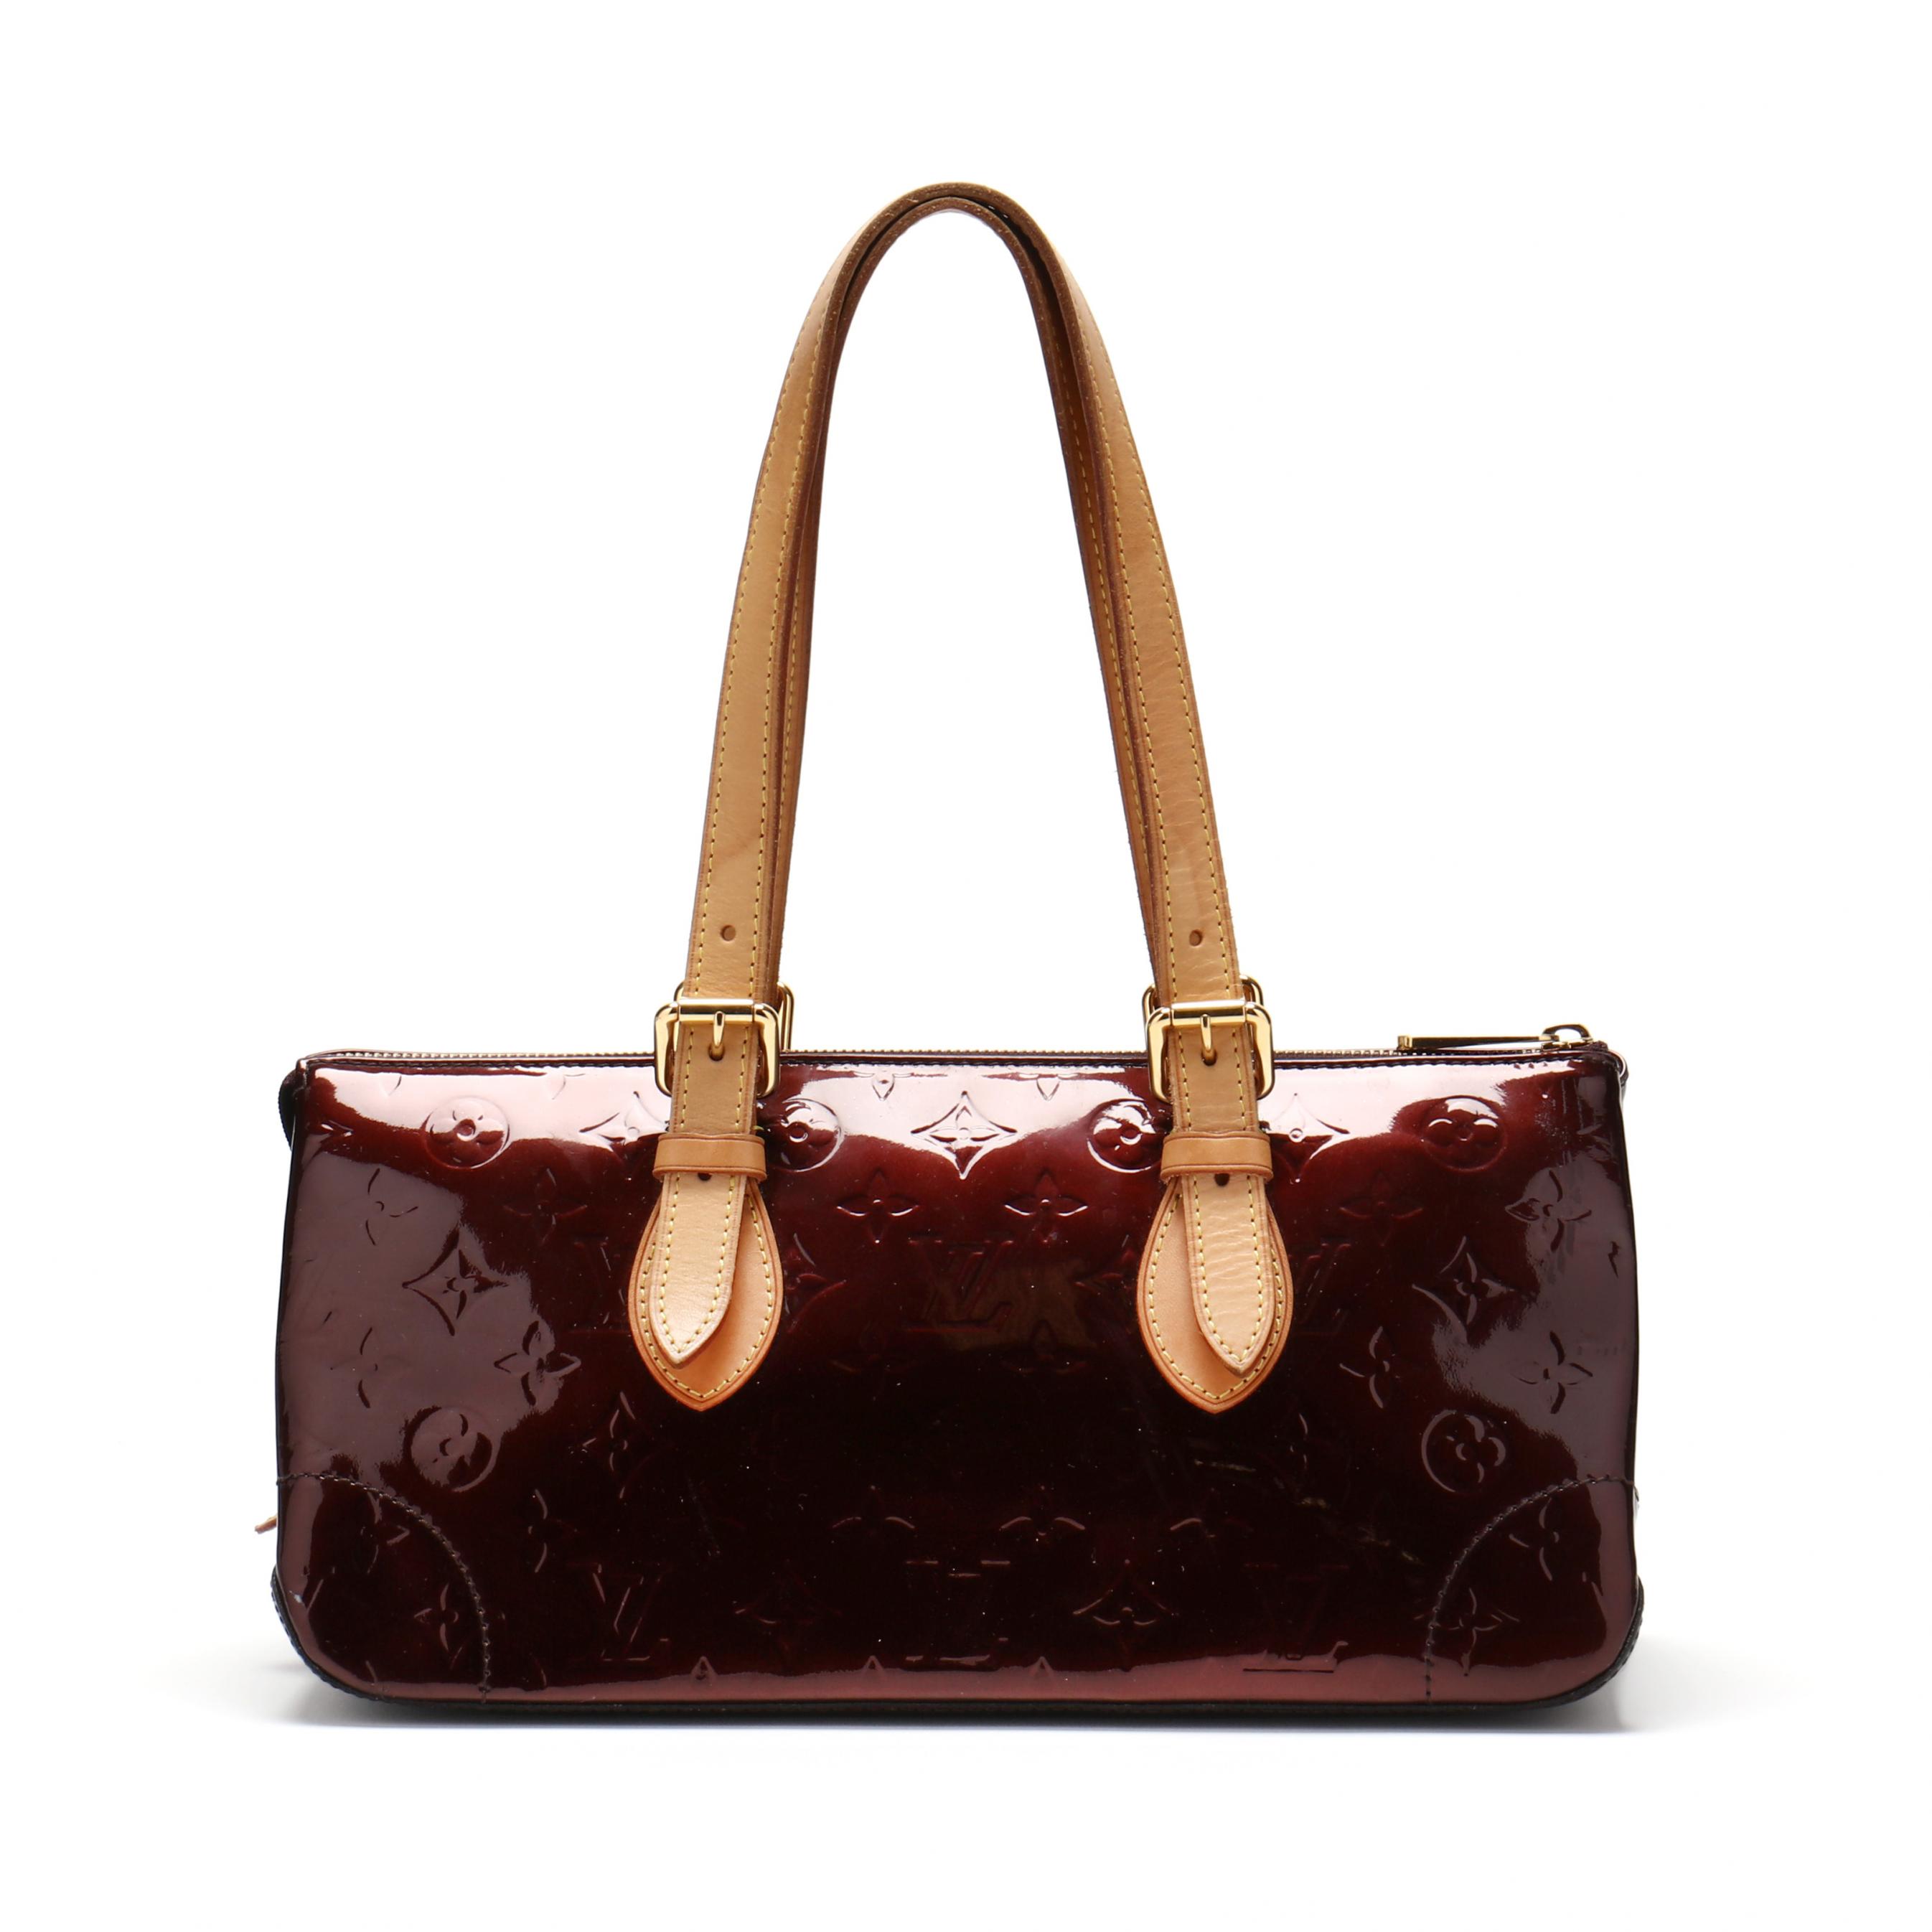 Sold at Auction: Louis Vuitton Red Vernis Leather Brentwood Tote